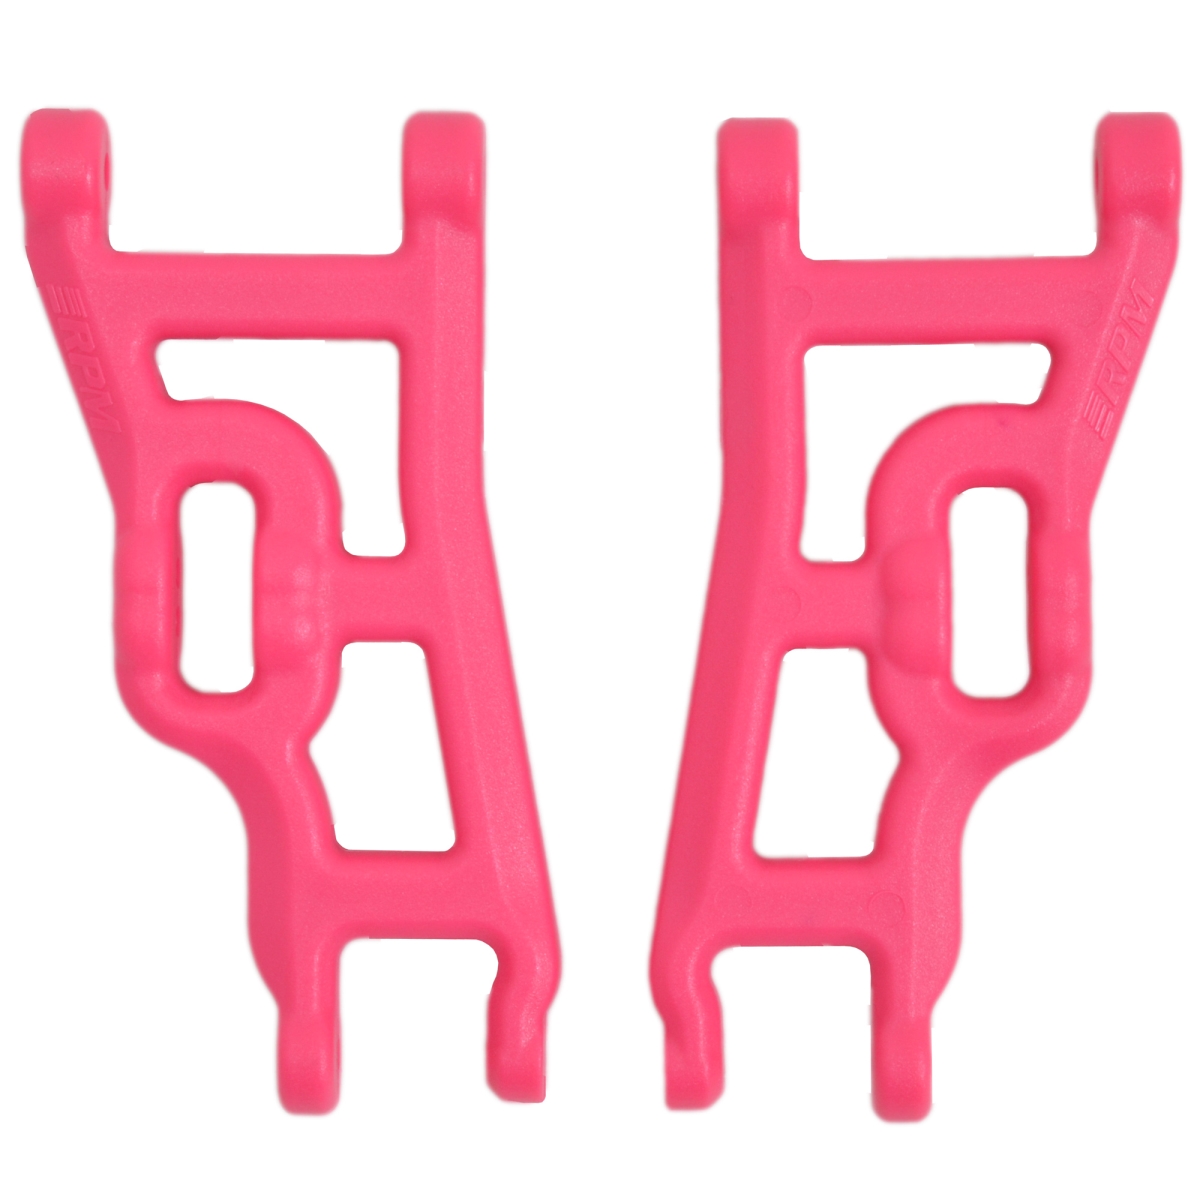 Rpm80247 Front A-arms, Pink For Traxxas Slash 2wd, Electric Set